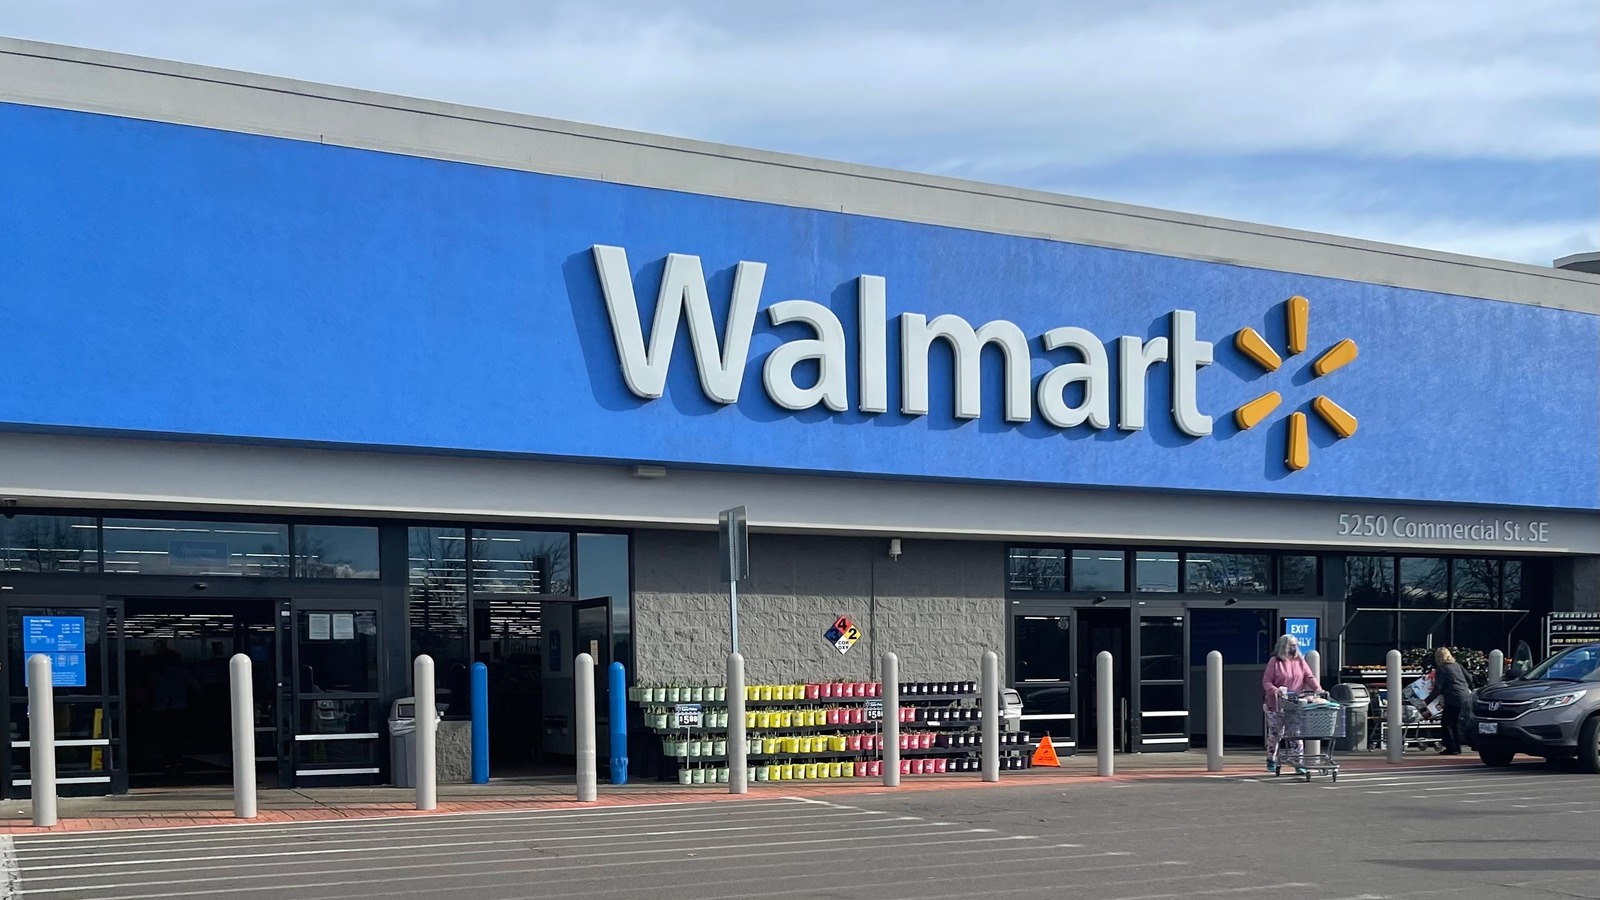 12 Foods You Might Want To Avoid Buying At Walmart